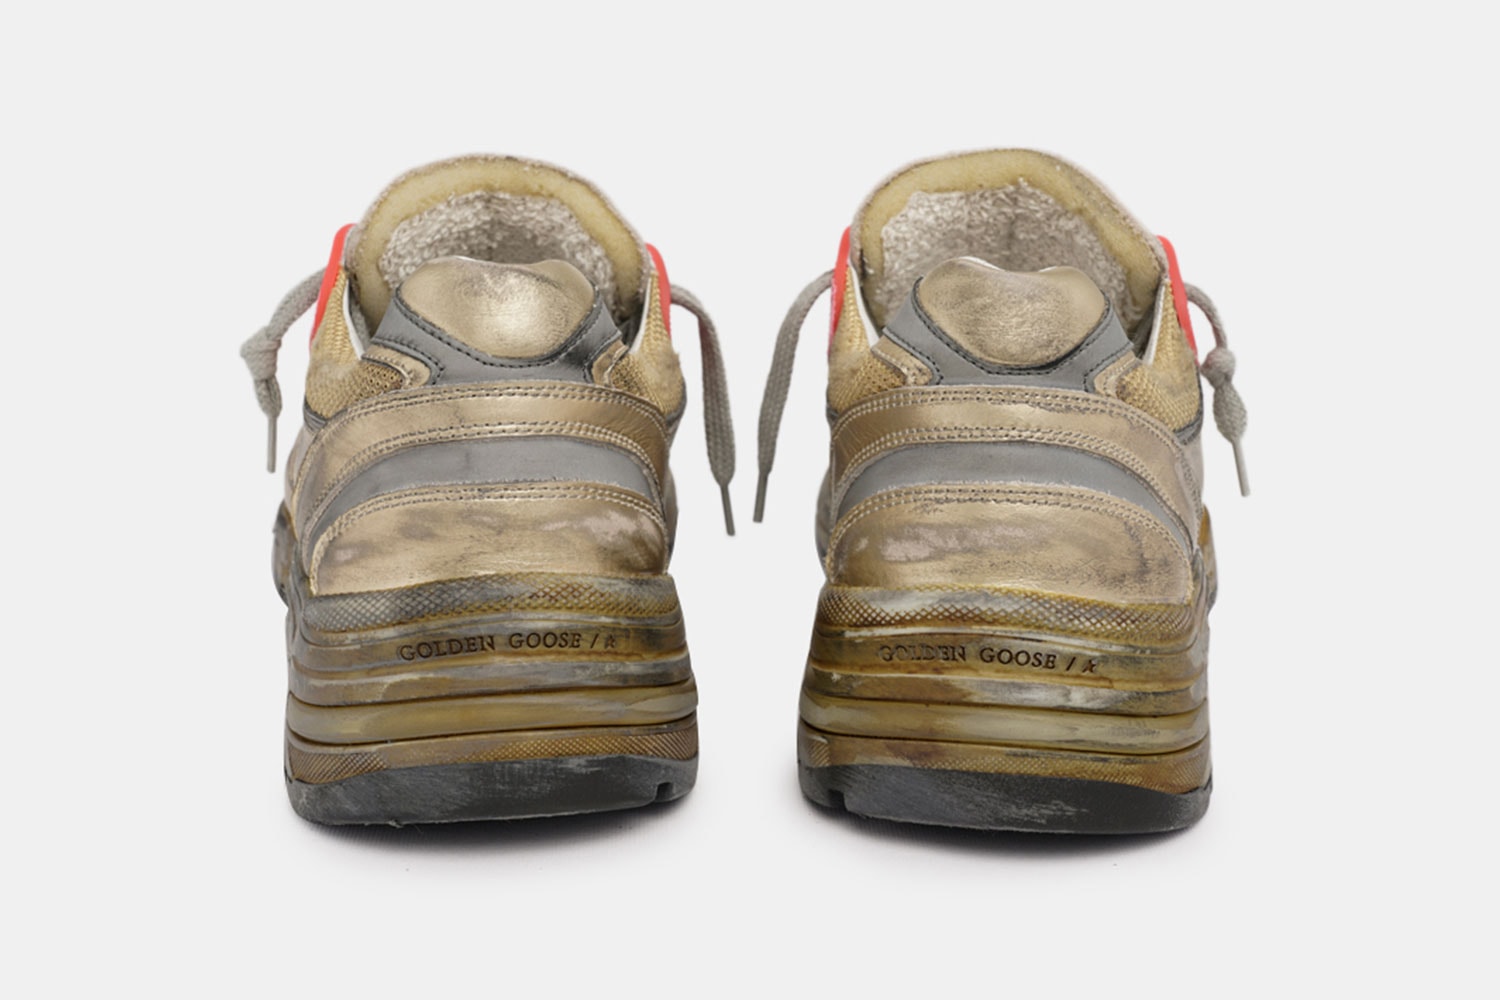 Golden Goose Dad Star Sneaker Blue Silver Red Gold colorways worn out luxury look drops release info